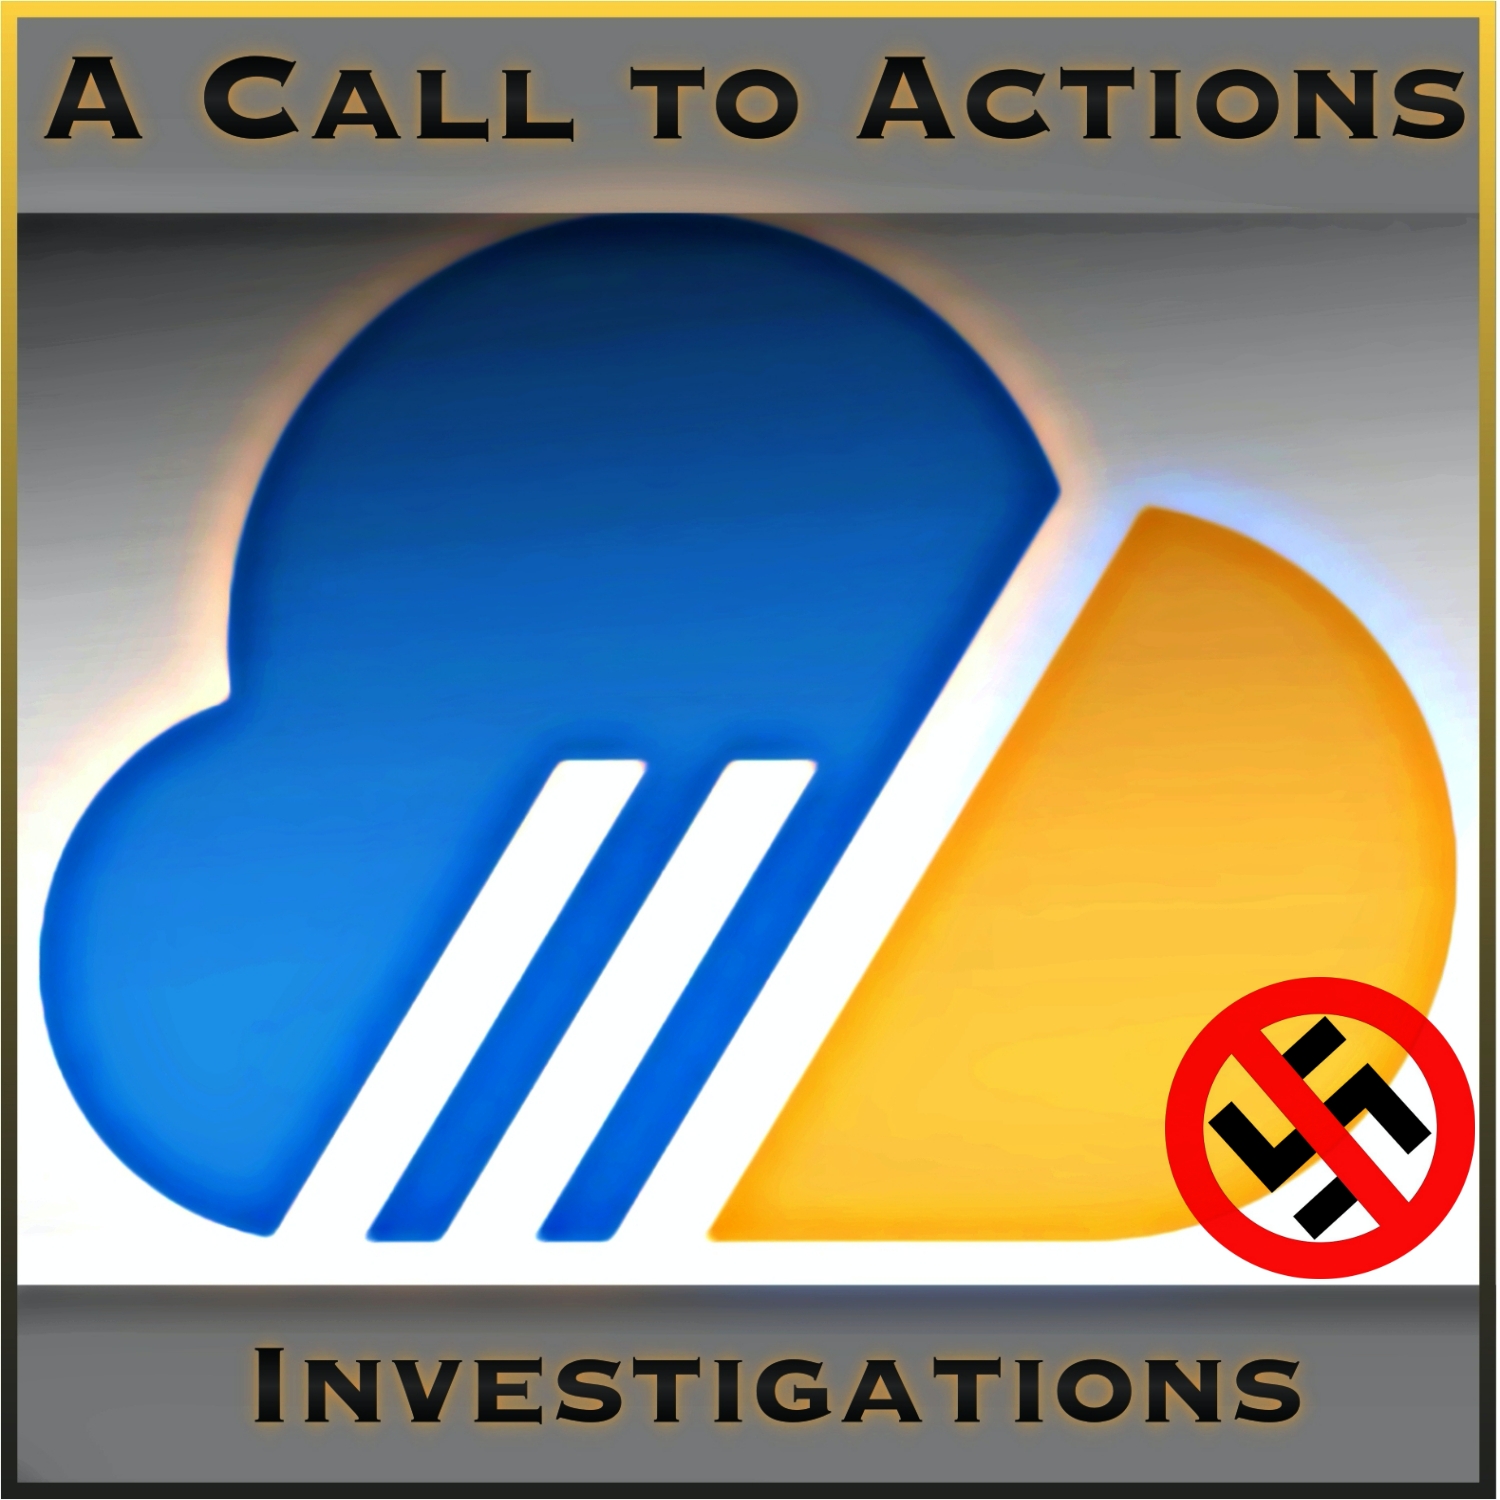 A Call to Actions